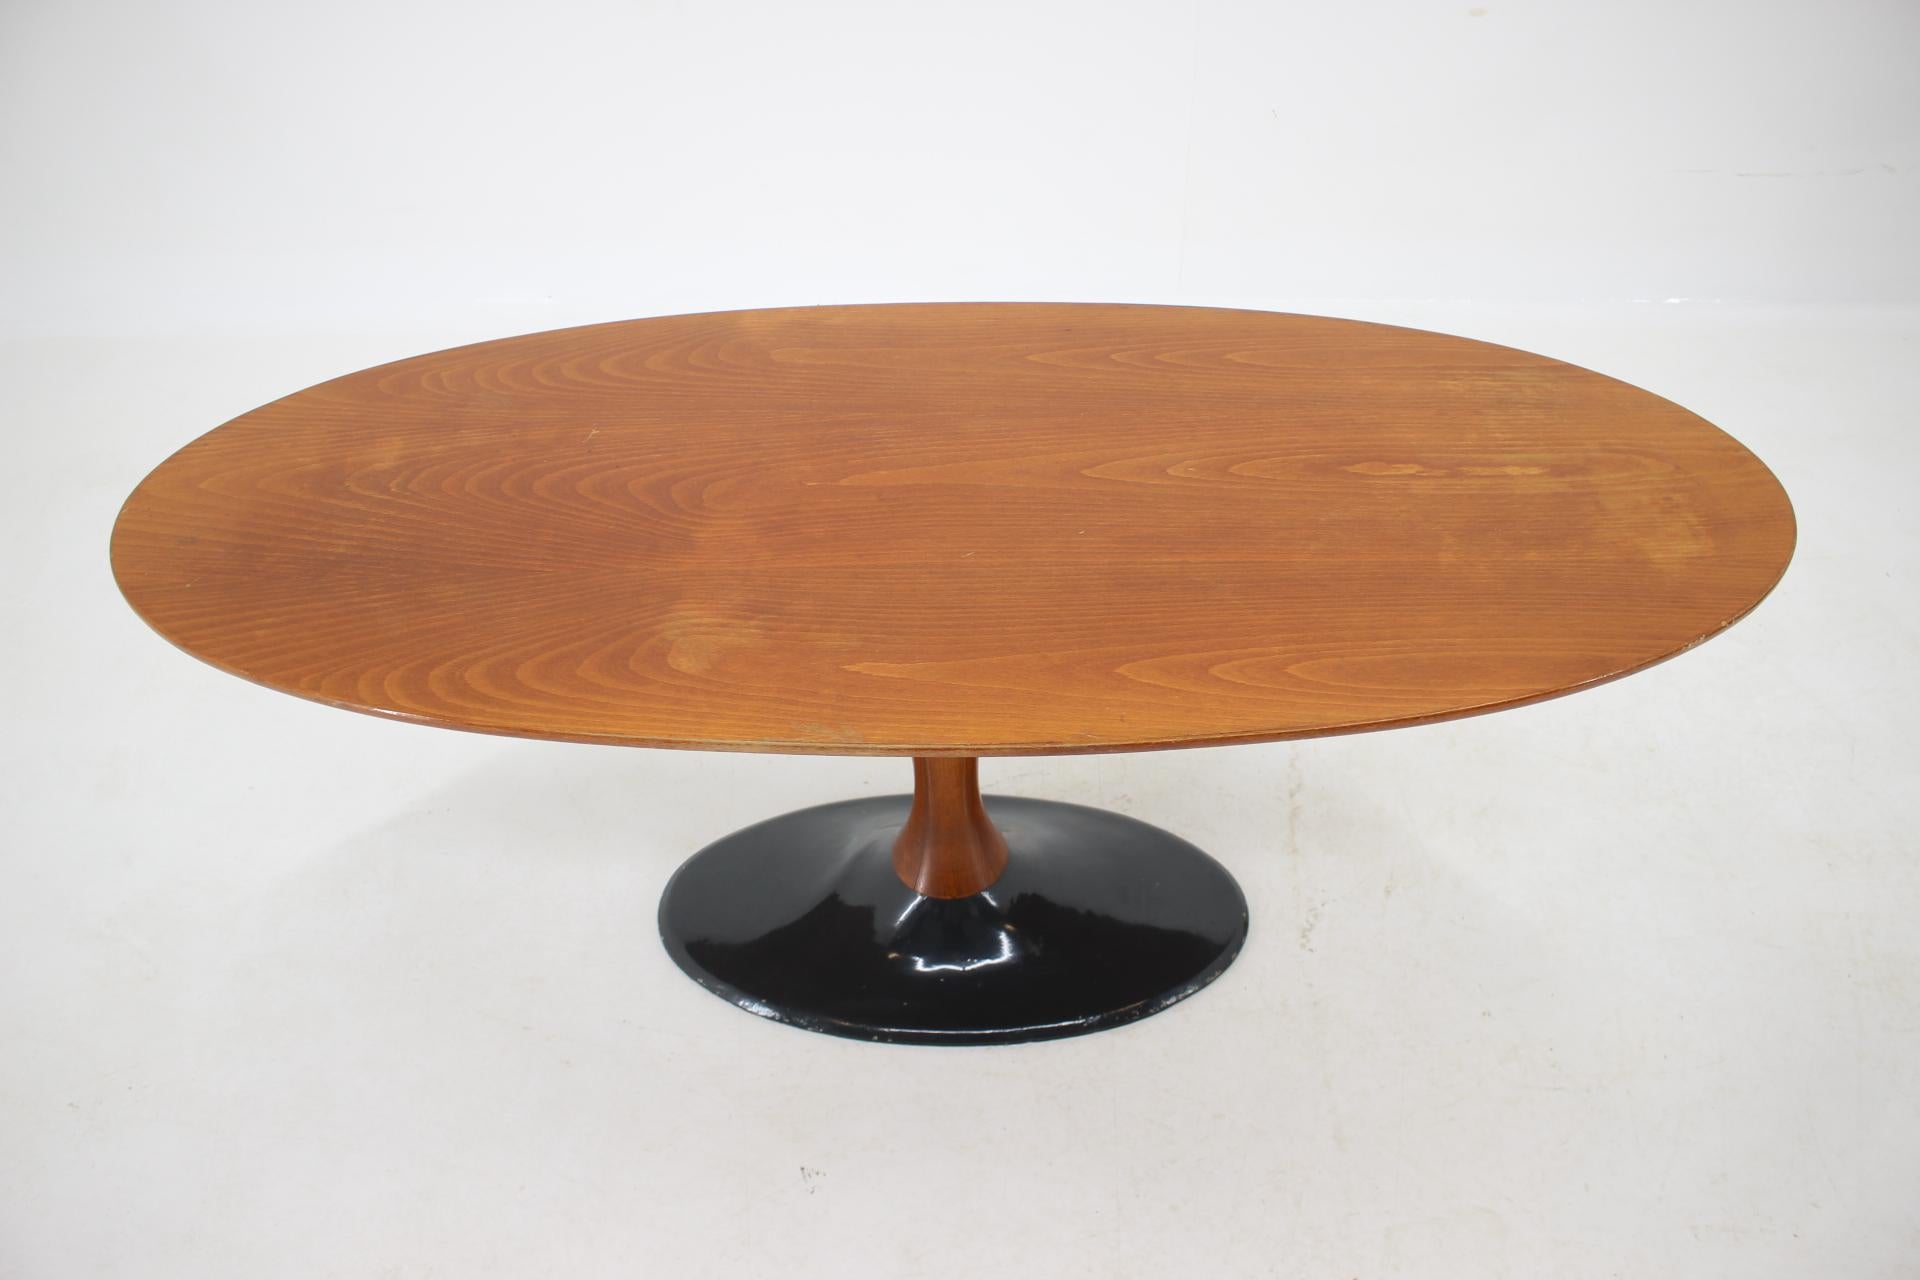 Czech Space Age Design Coffee Table, 1970s